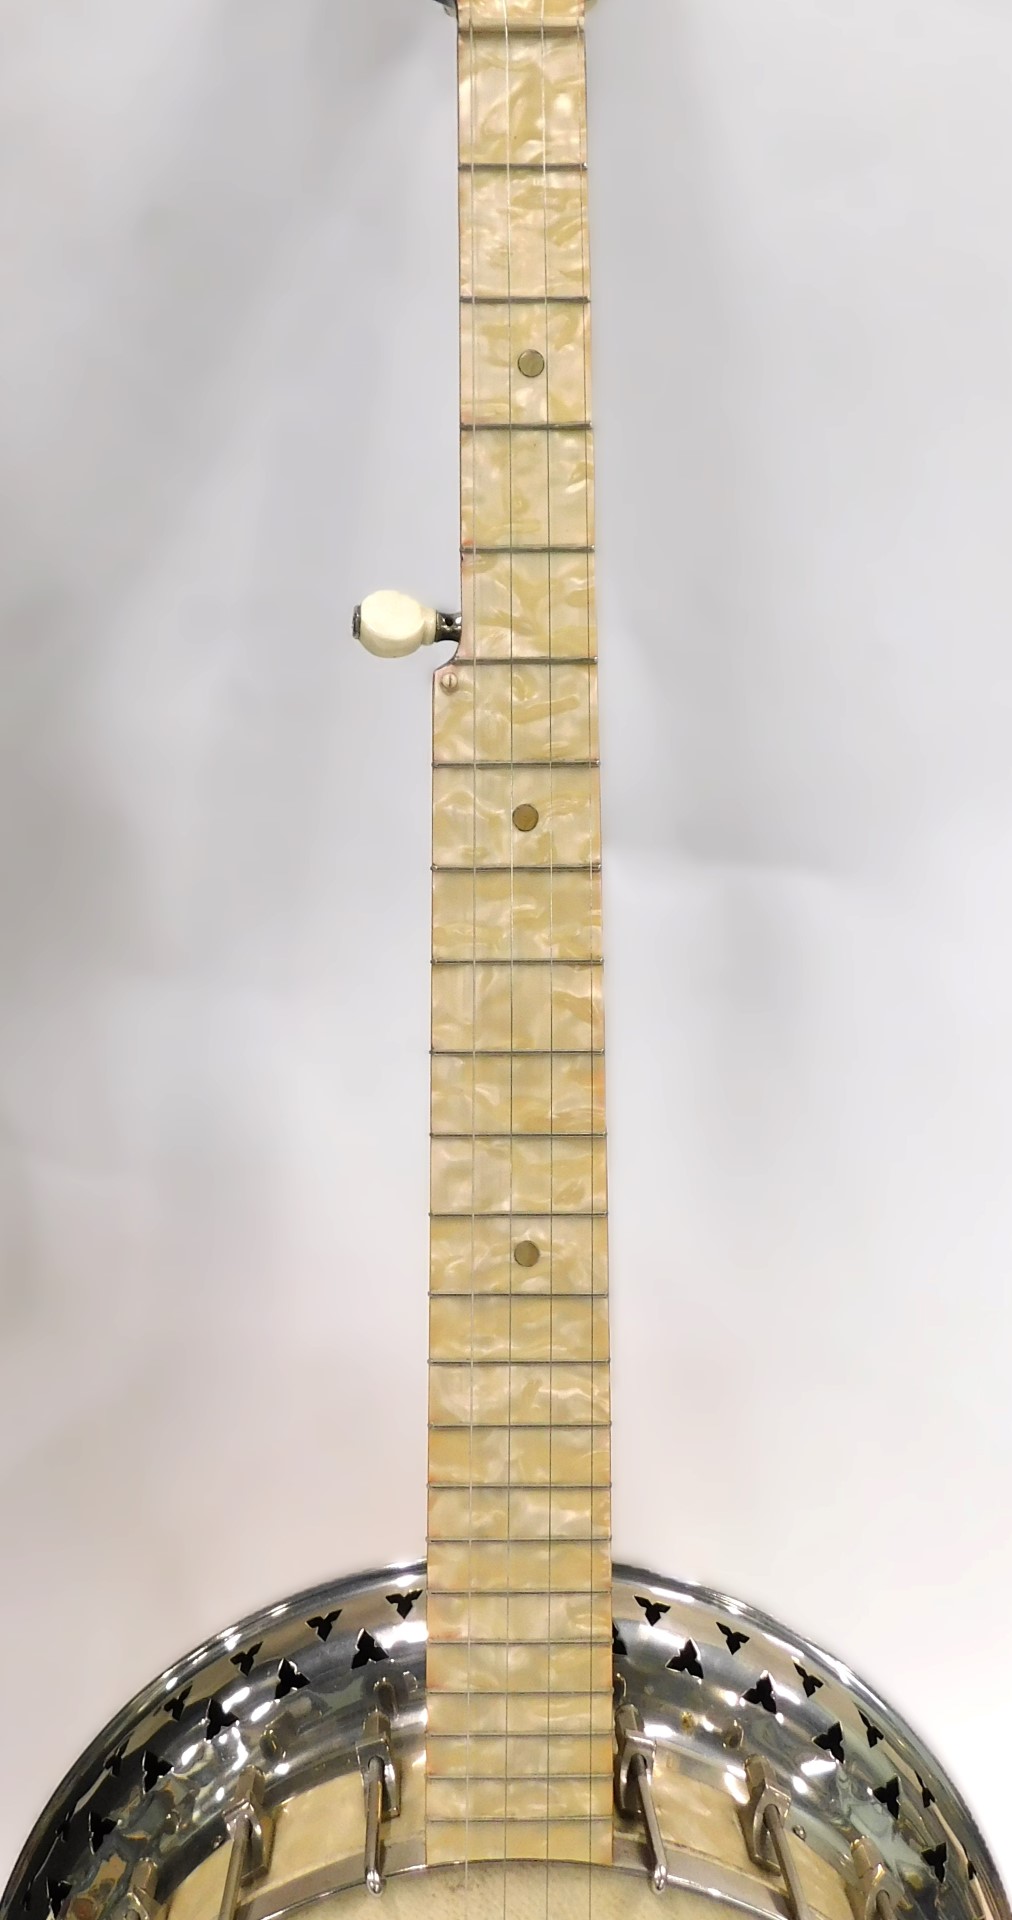 A B&S Master of London Ivory Queen banjo, with a simulated mother of pearl finger board, sides and b - Image 3 of 6